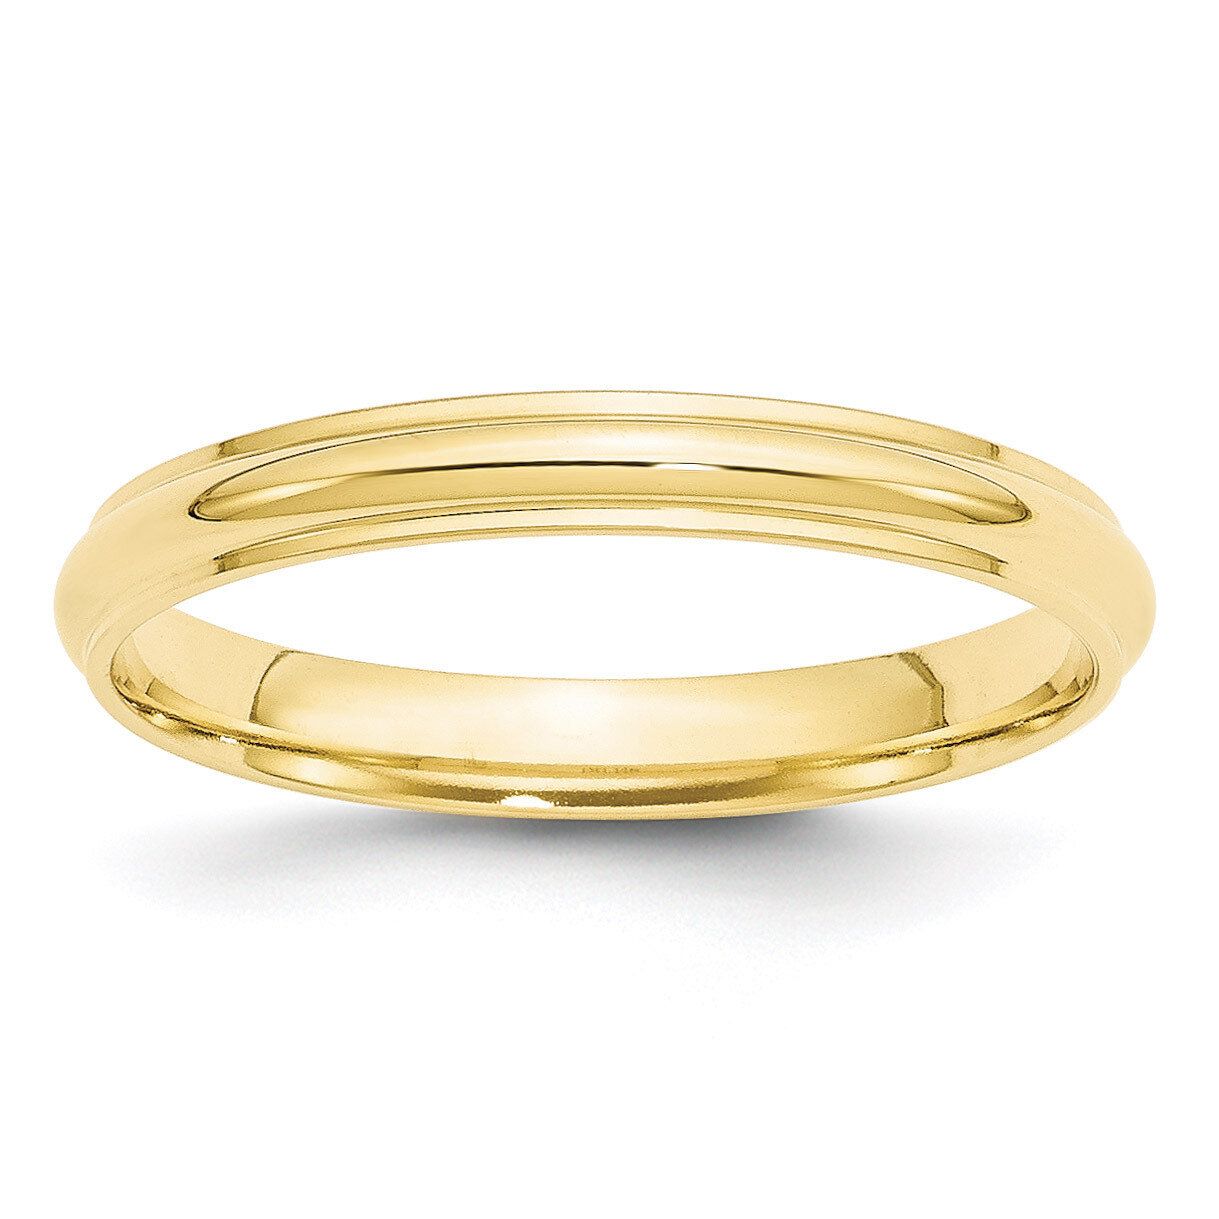 3mm Half Round with Edge Band 10k Yellow Gold Engravable 1HRE030-10